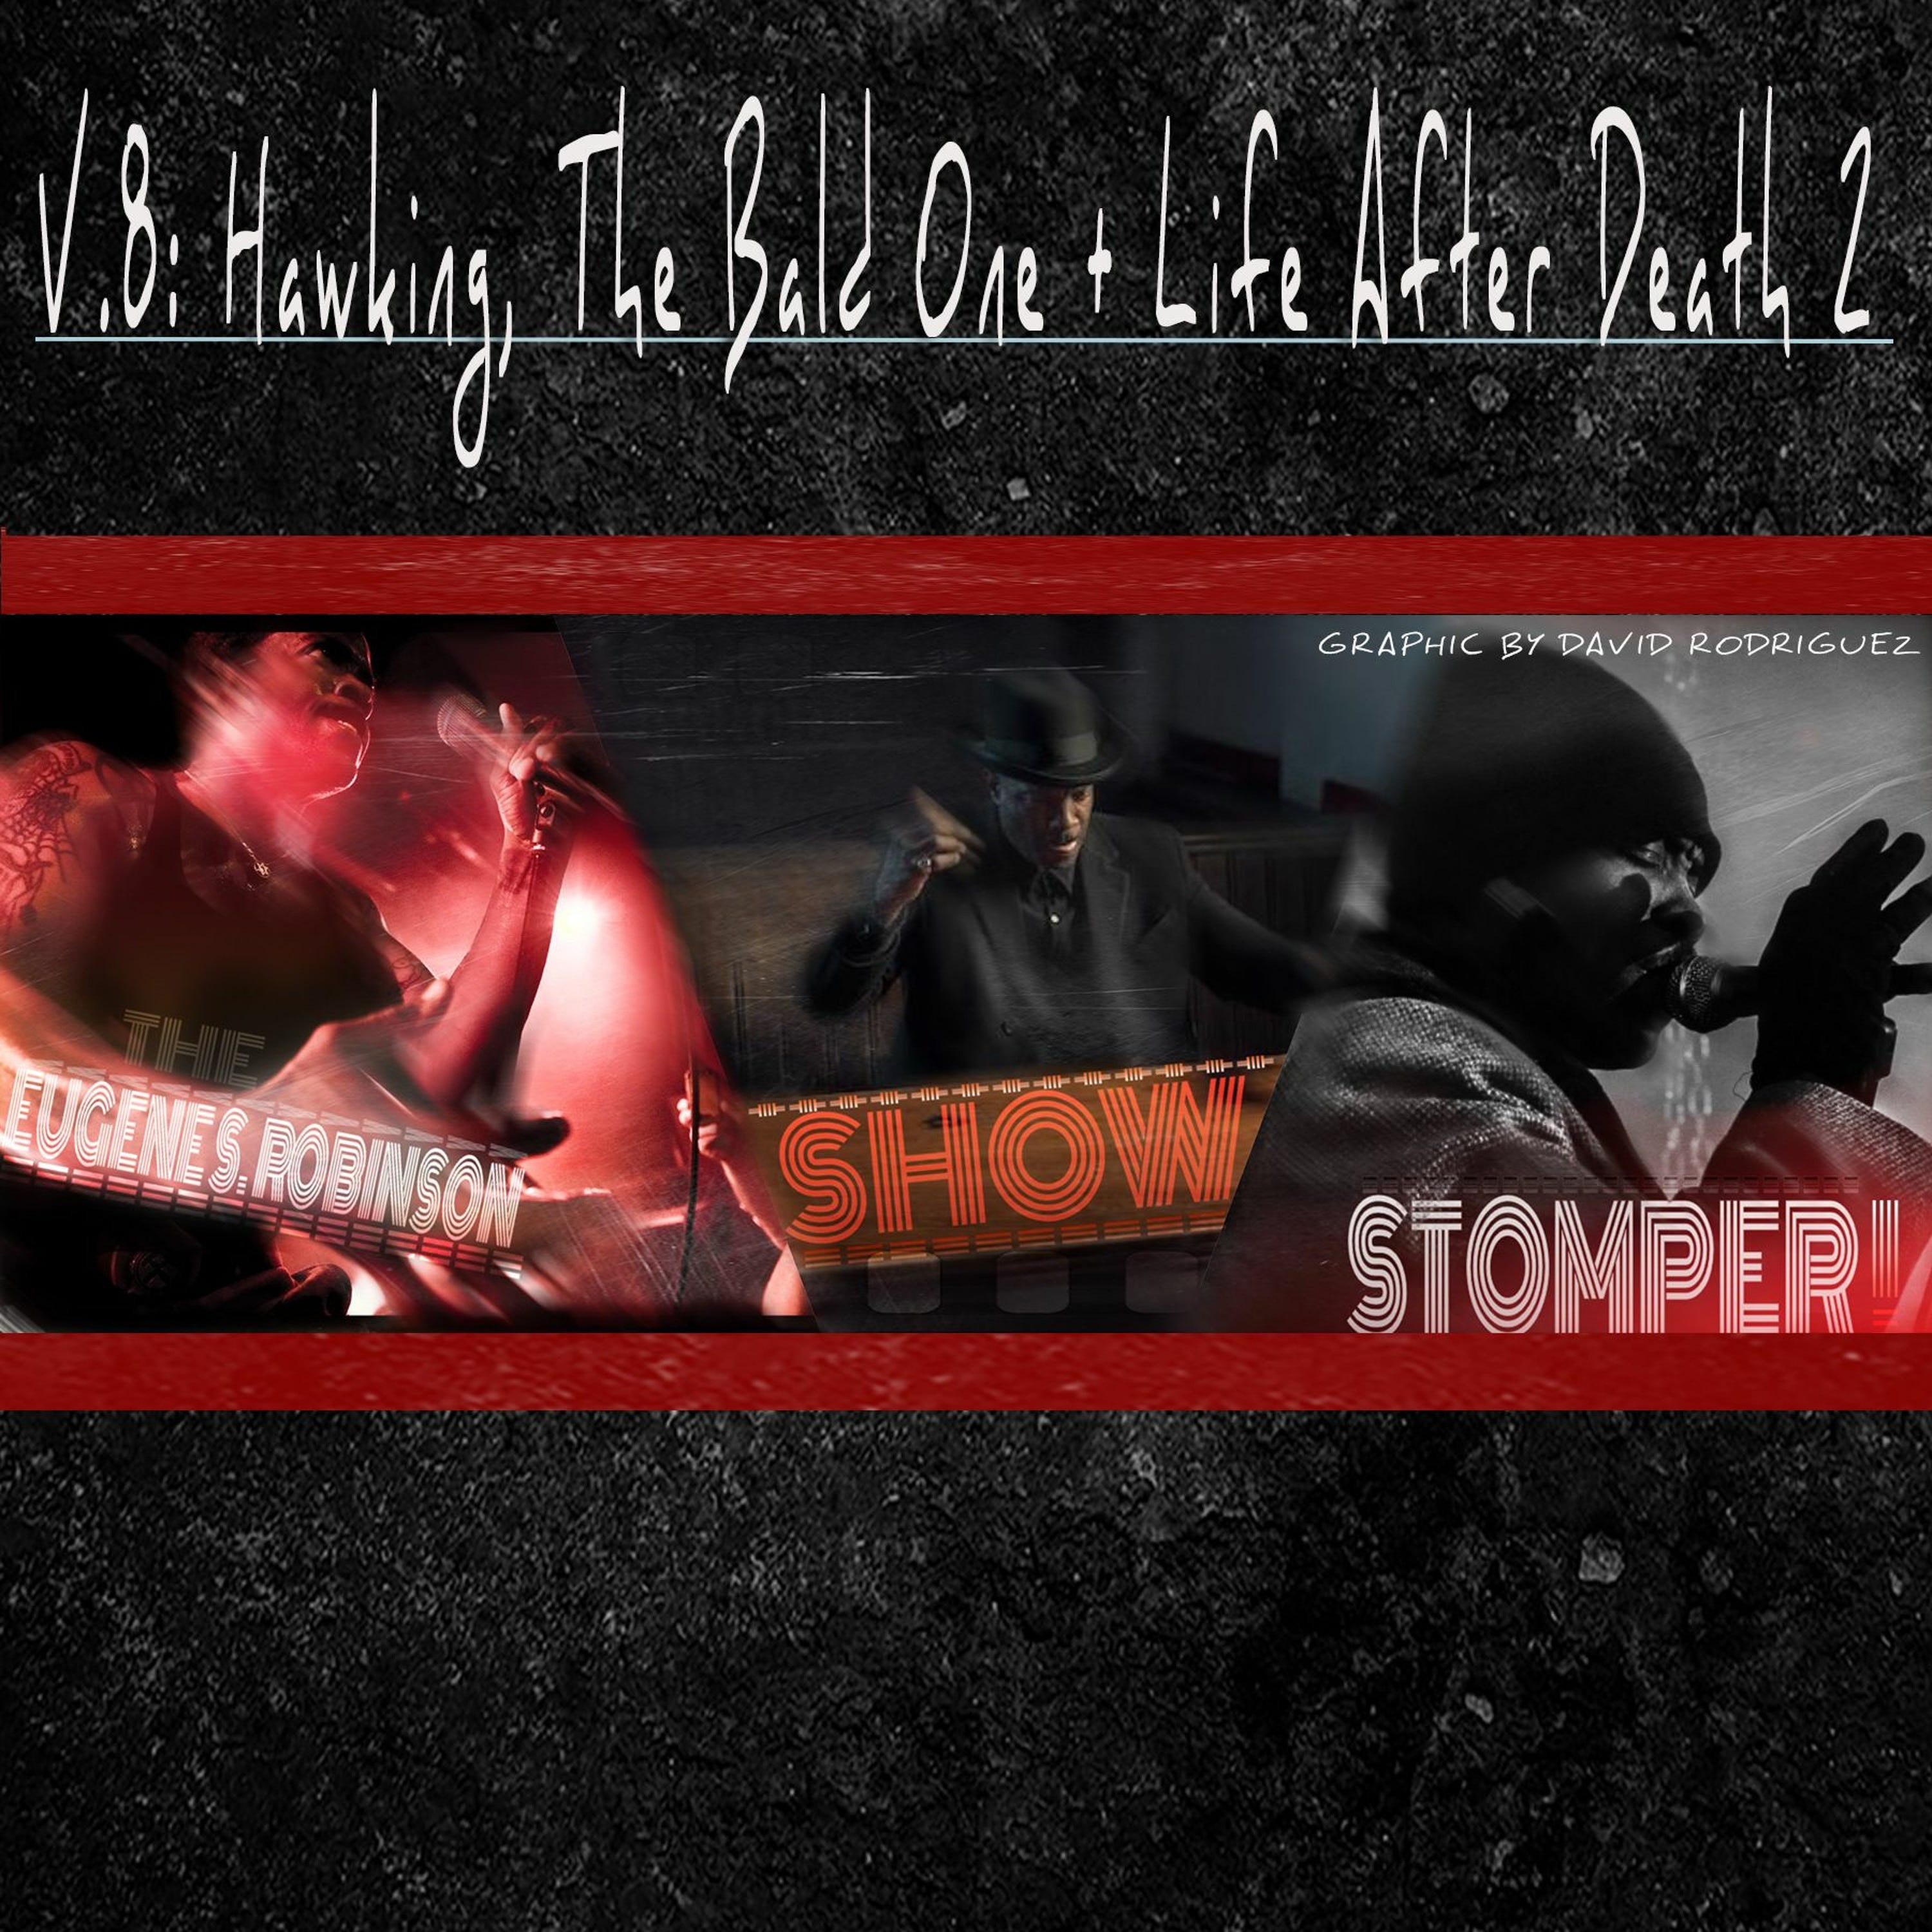 The Eugene S. Robinson Show Stomper! - V.8: Hawking, The Bald One + Life After Death 2